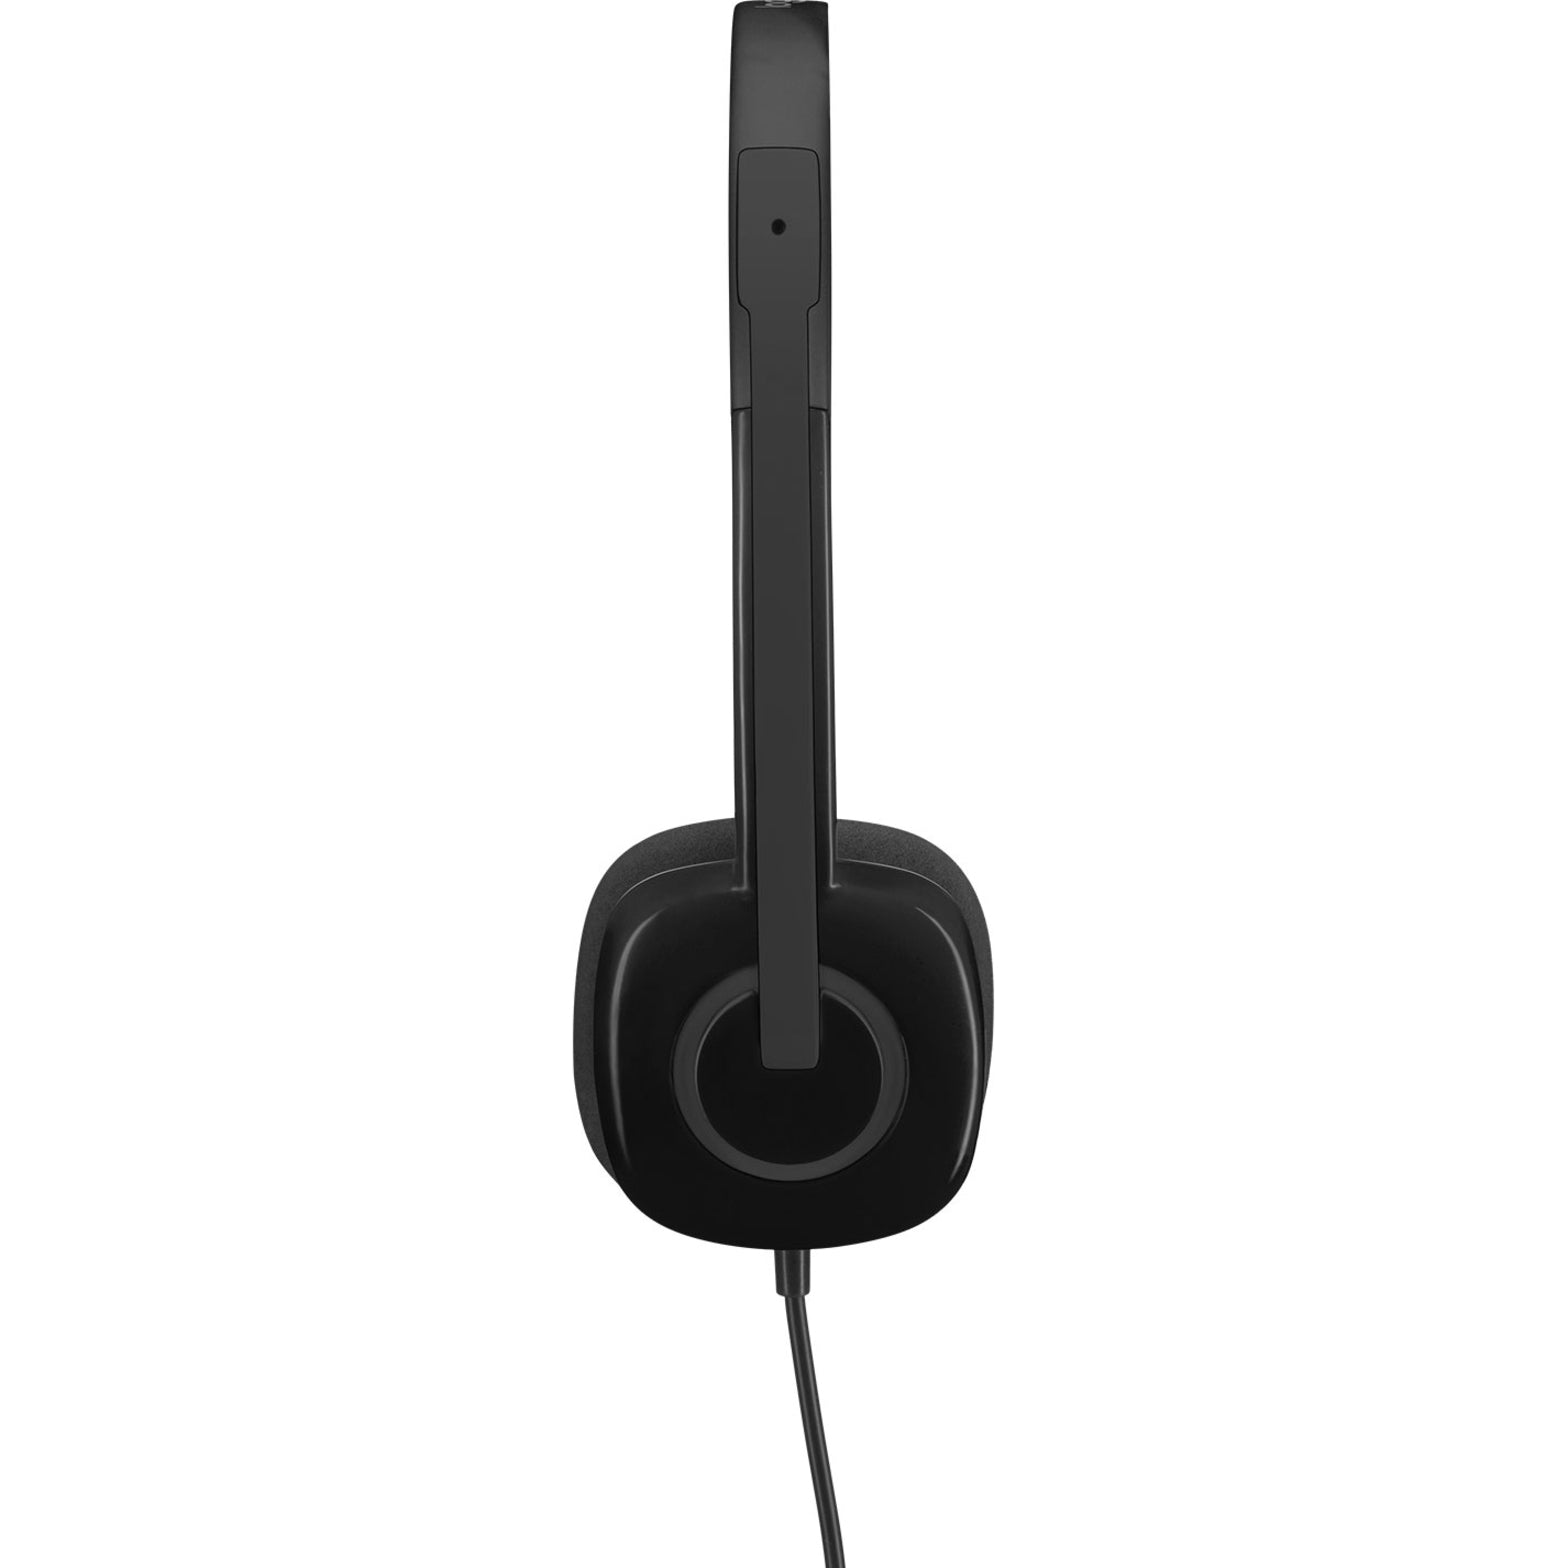 Logitech 981-000587 Stereo Headset H151, Binaural Over-the-head, 2 Year Warranty, Boom Microphone, Mini-phone (3.5mm) Interface, In-Line Controller, Comfortable, Adjustable Headband, Noise Canceling, Wired